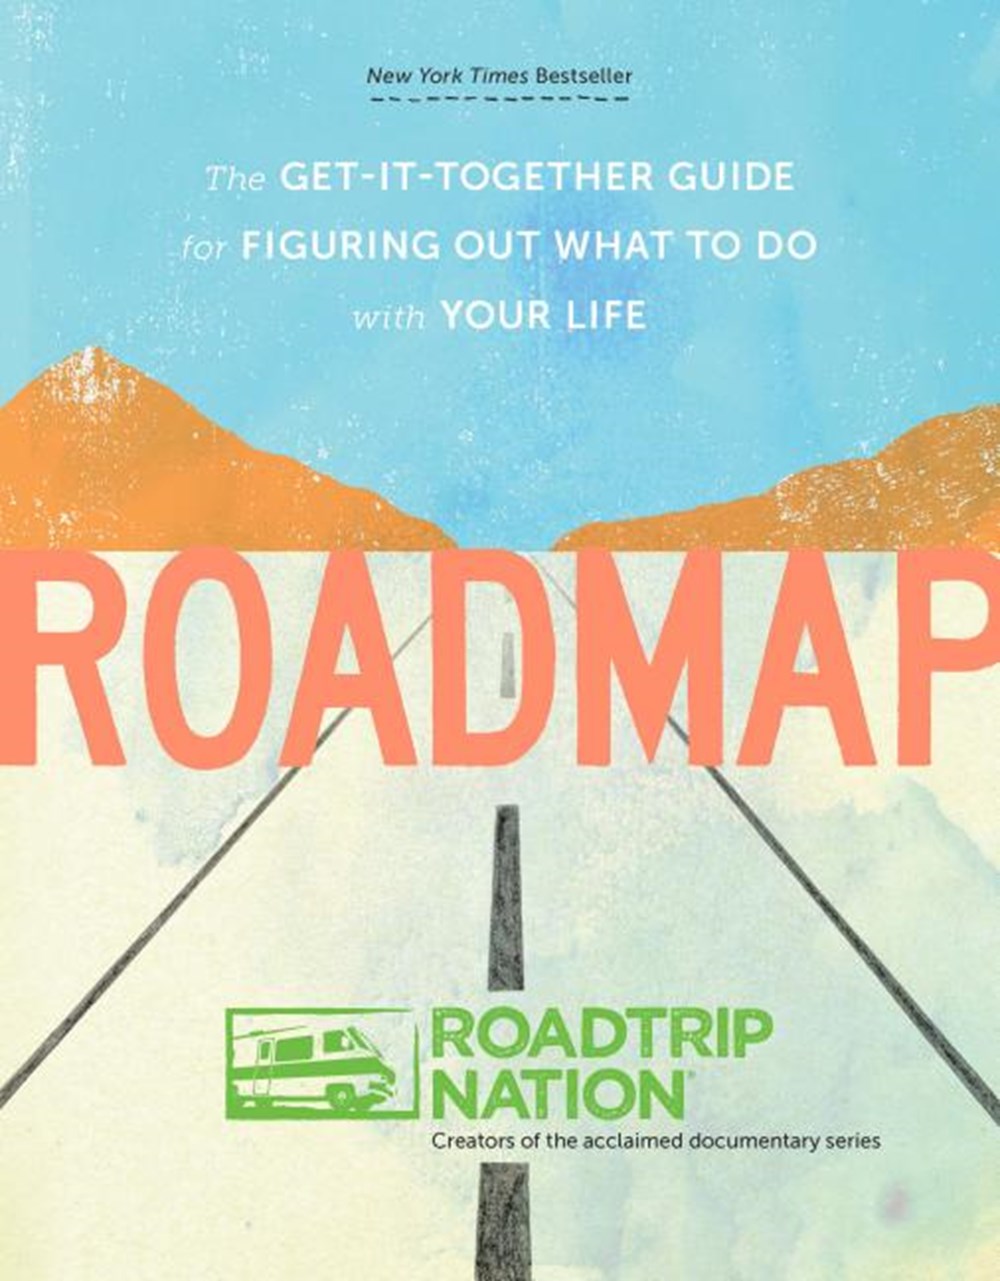 Roadmap The Get-It-Together Guide for Figuring Out What to Do with Your Life